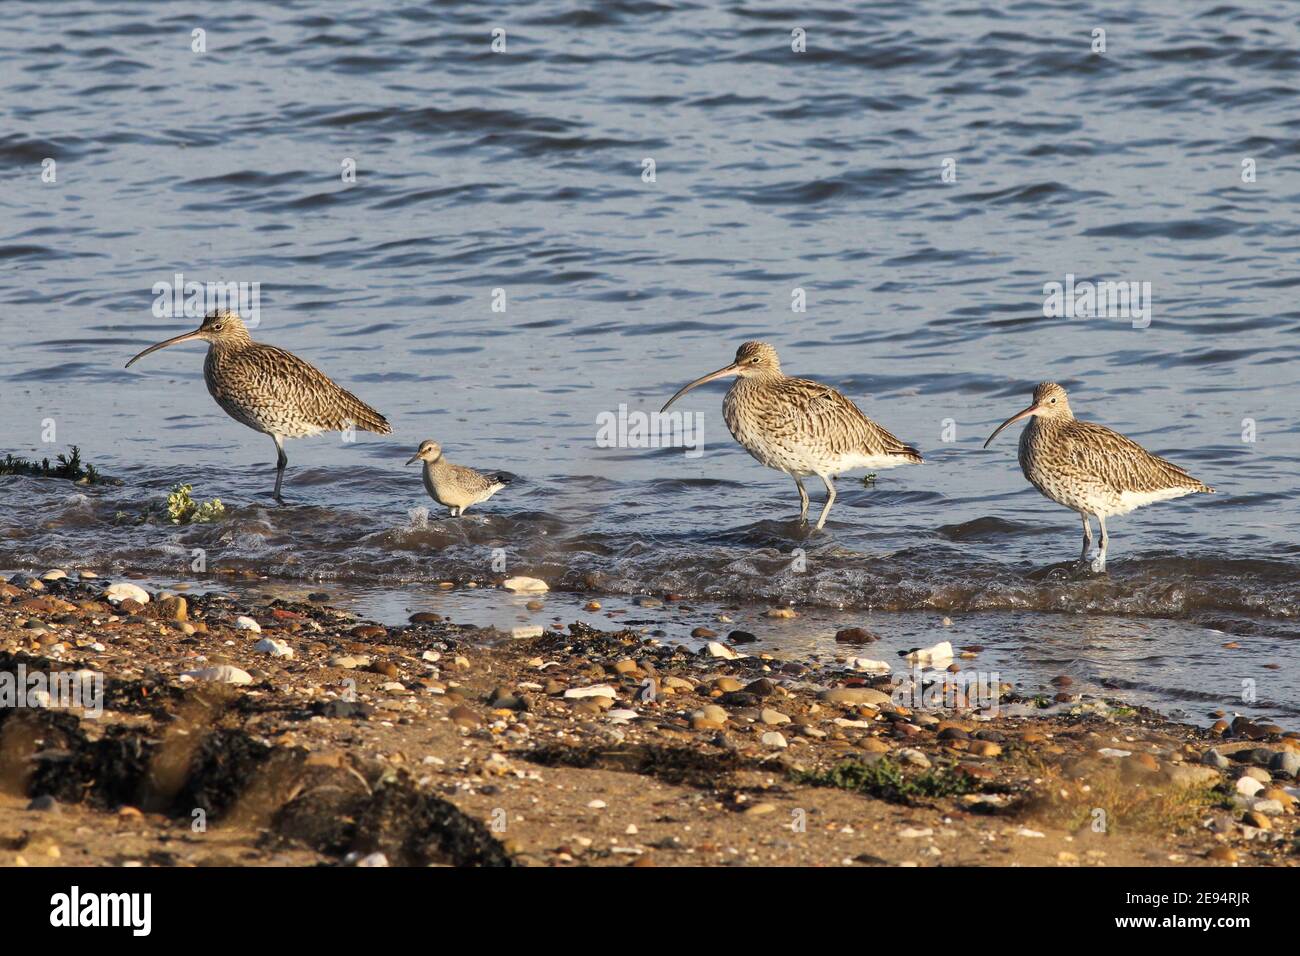 Wading birds on the shoreline at Spurn Point, National Nature Reserve, Kilnsea, E.Yorks, UK. (3 Eurasian Curlew and 1 Knot) Stock Photo